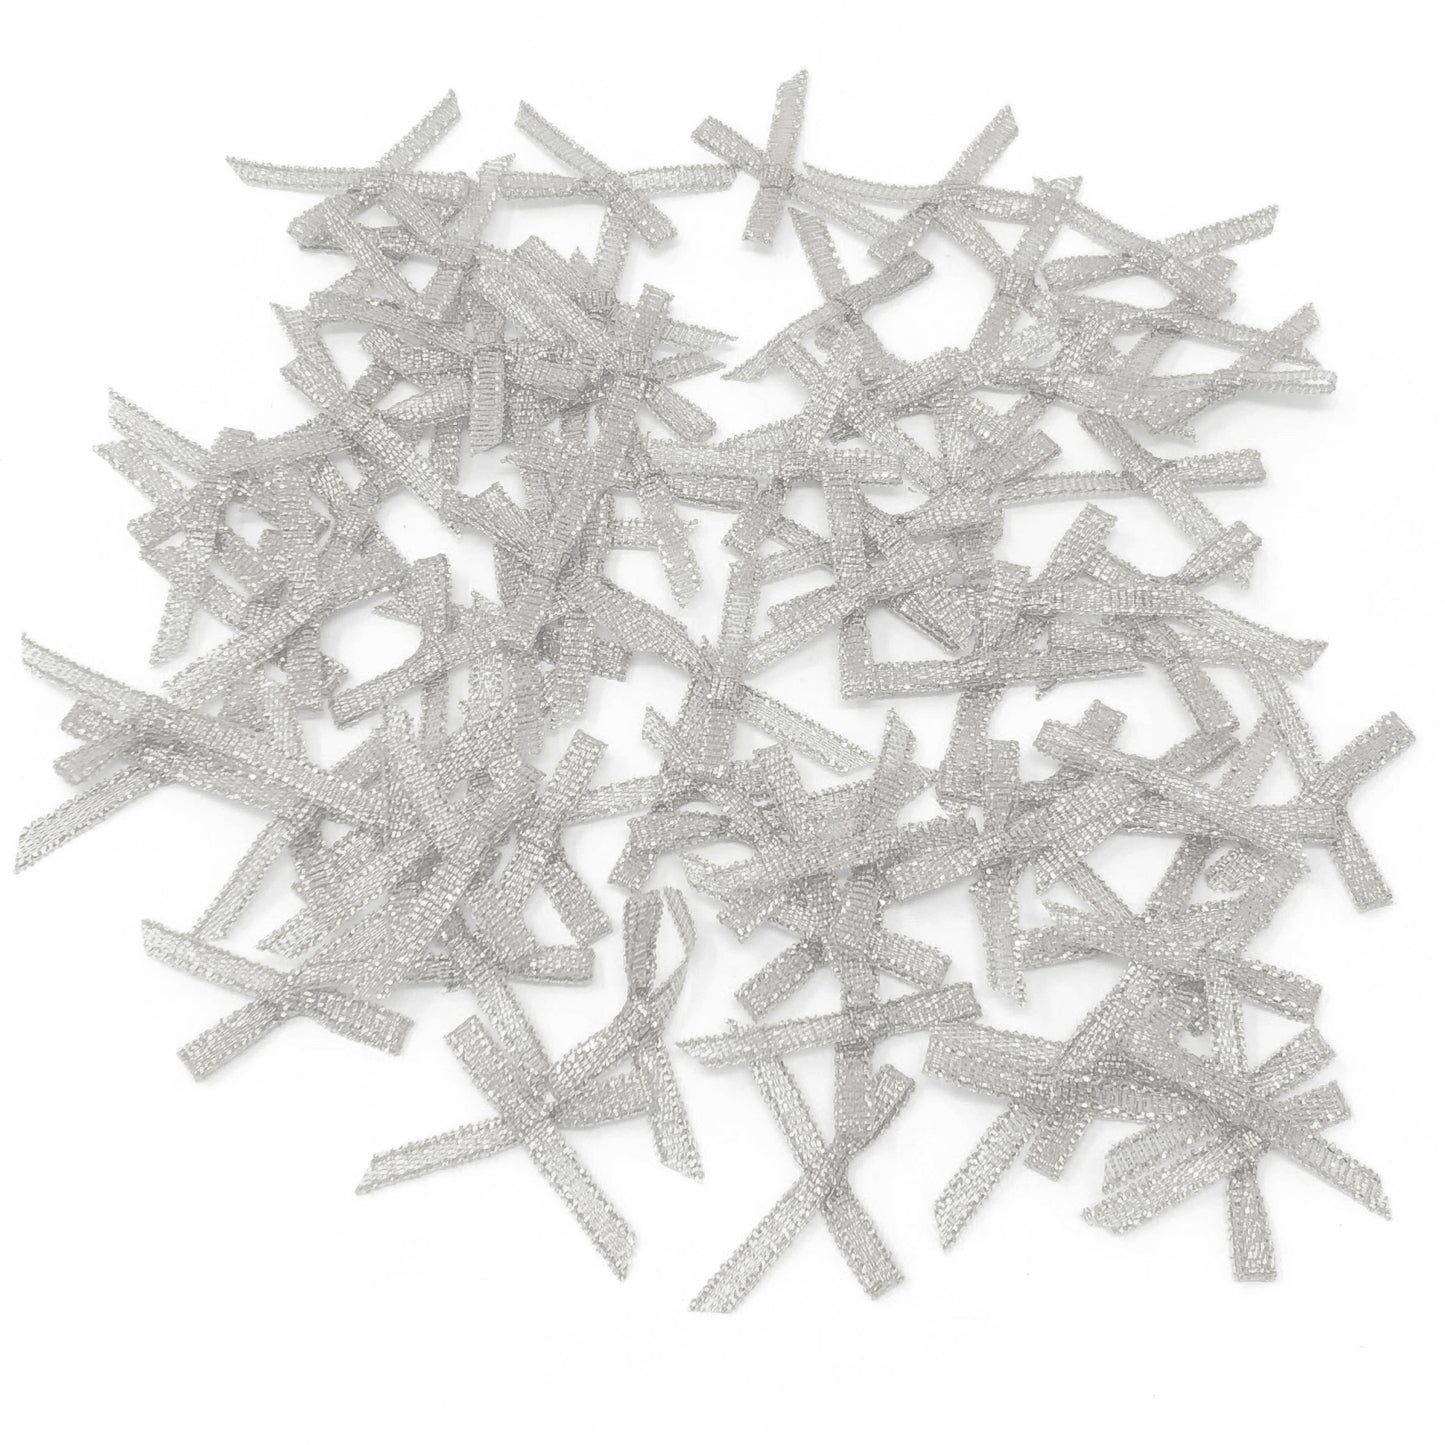 Silver 3mm 30x20mm Christmas Ribbon Bows - Pack of 75